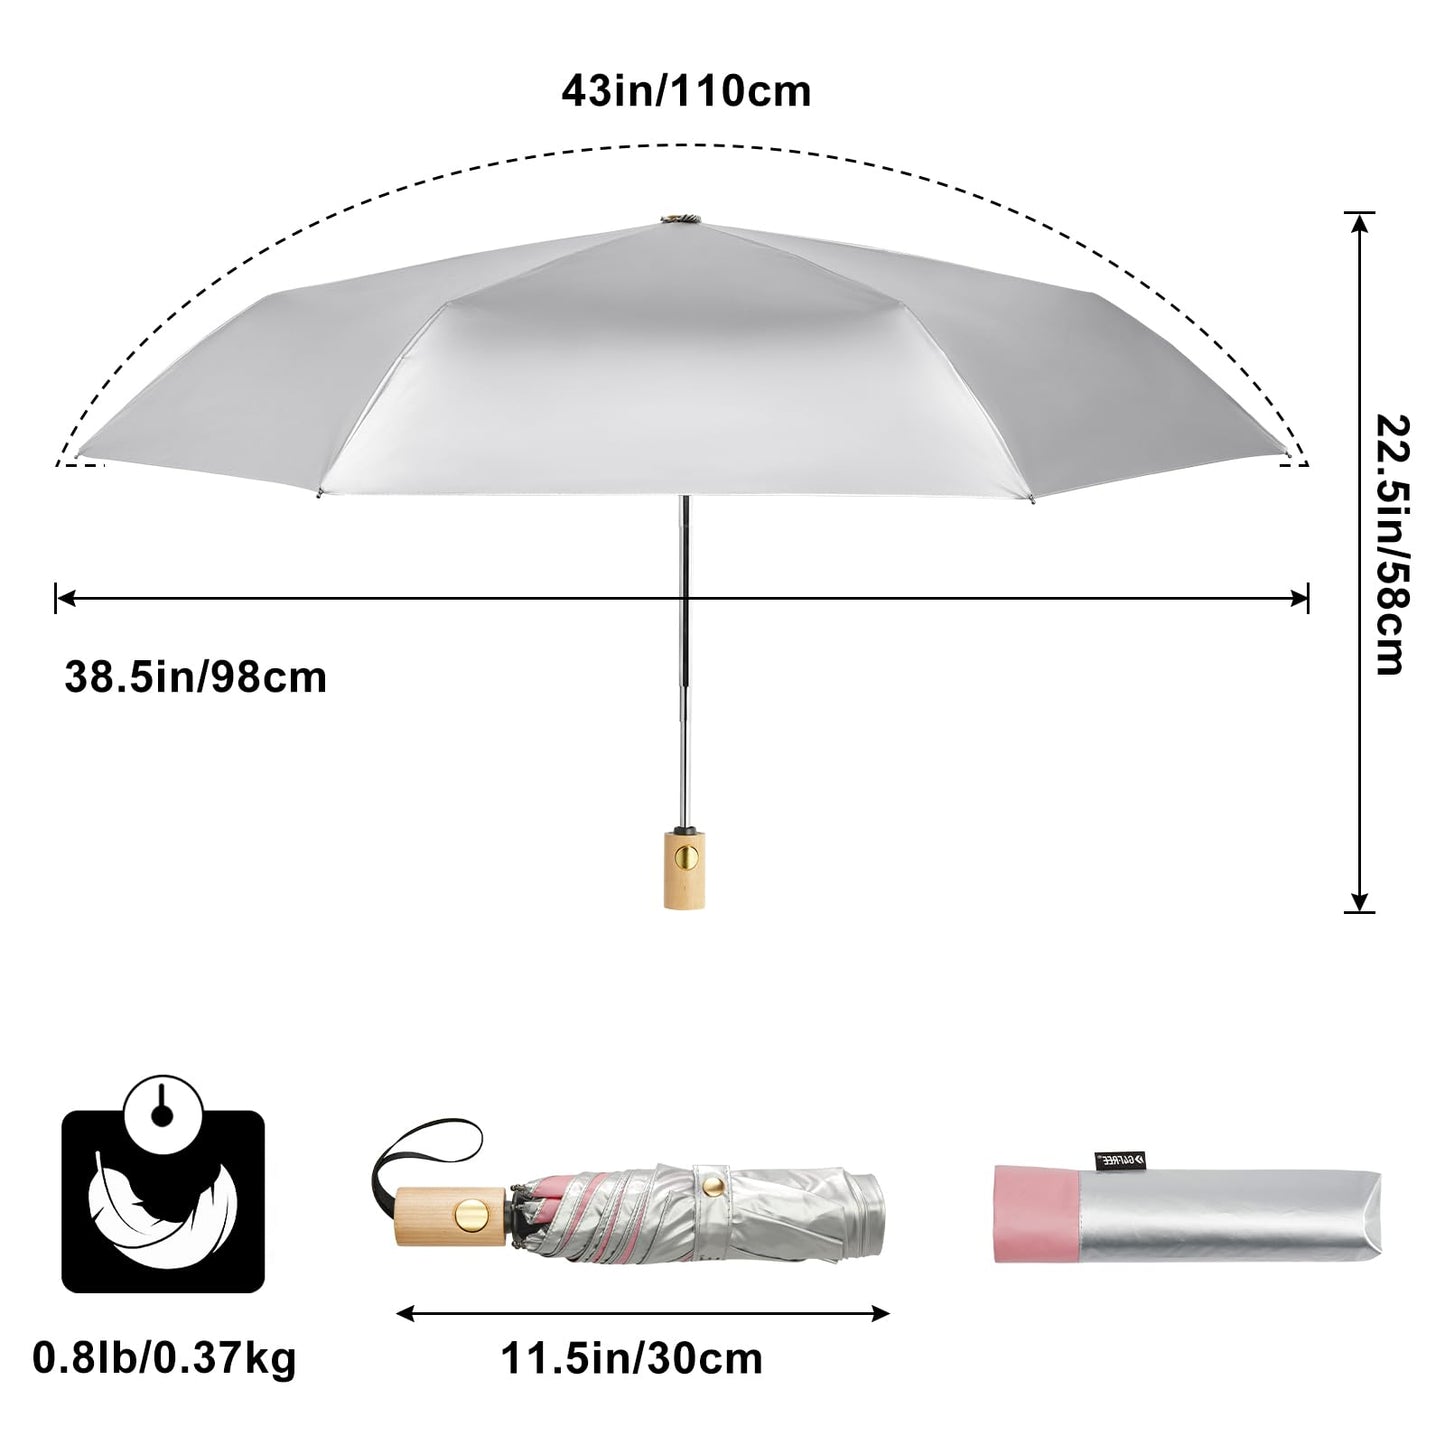 G4Free UPF 50+ UV Protection Travel Umbrella with Wooden Handle